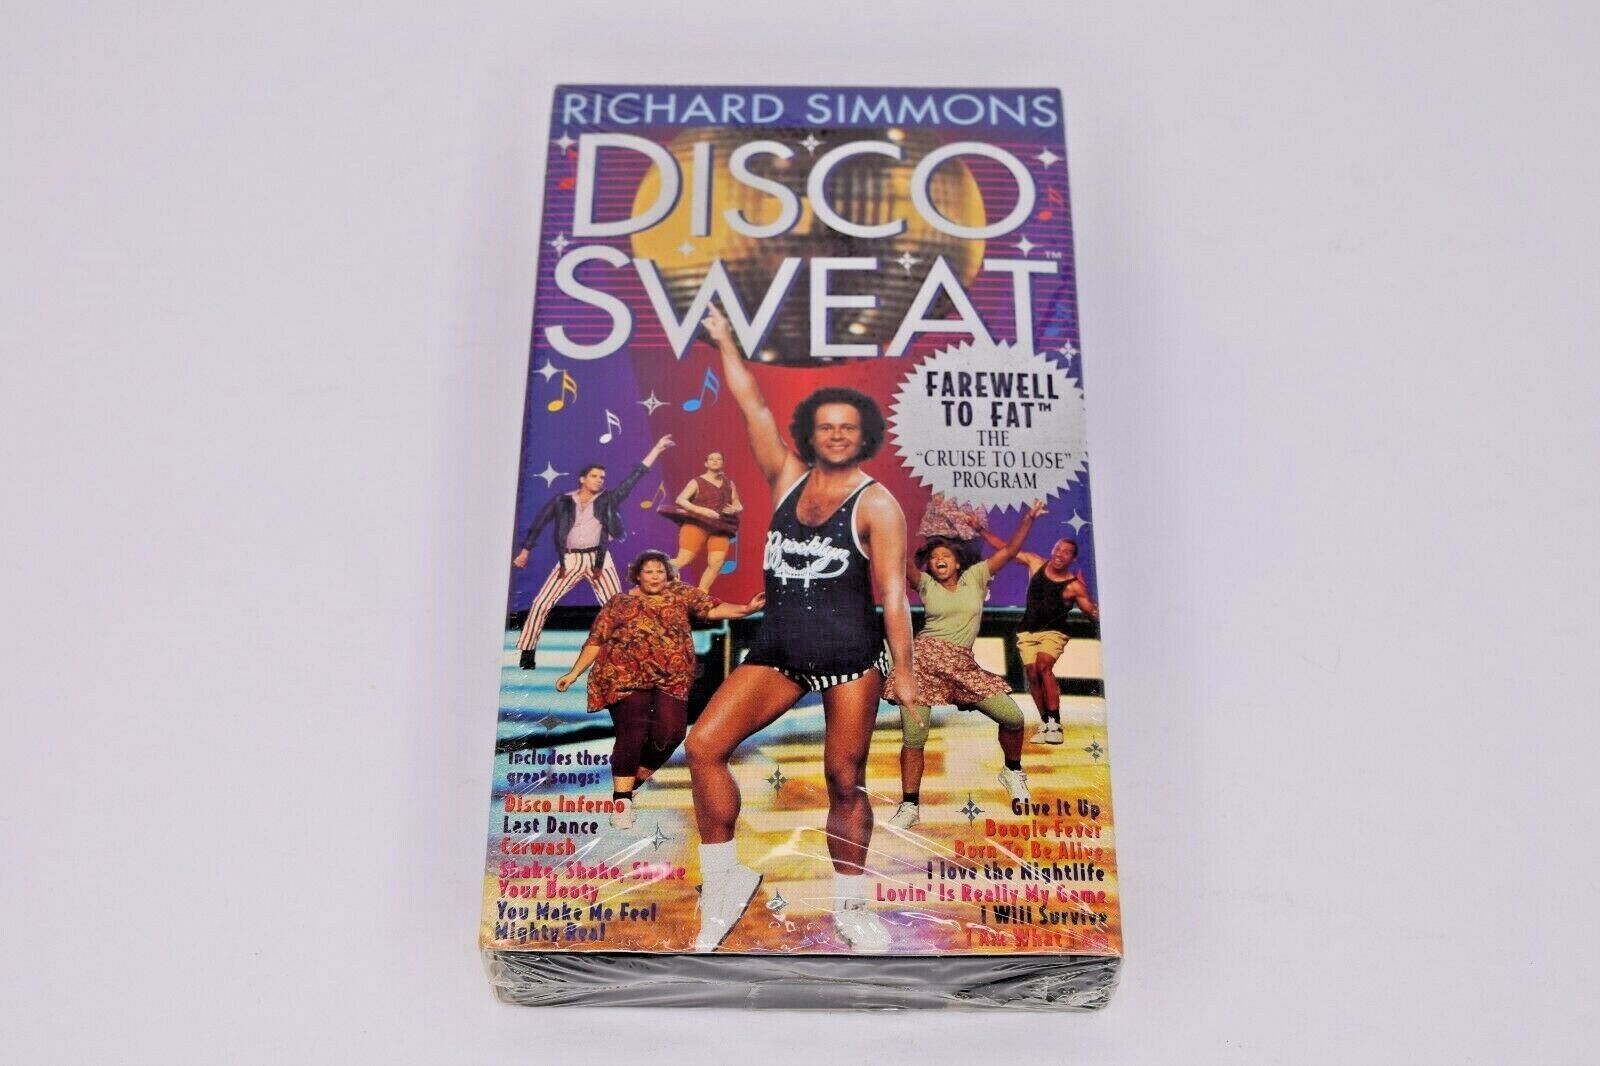 Primary image for Richard Simmons - Disco Sweat Farewell to Fat (VHS, 1994) New Sealed